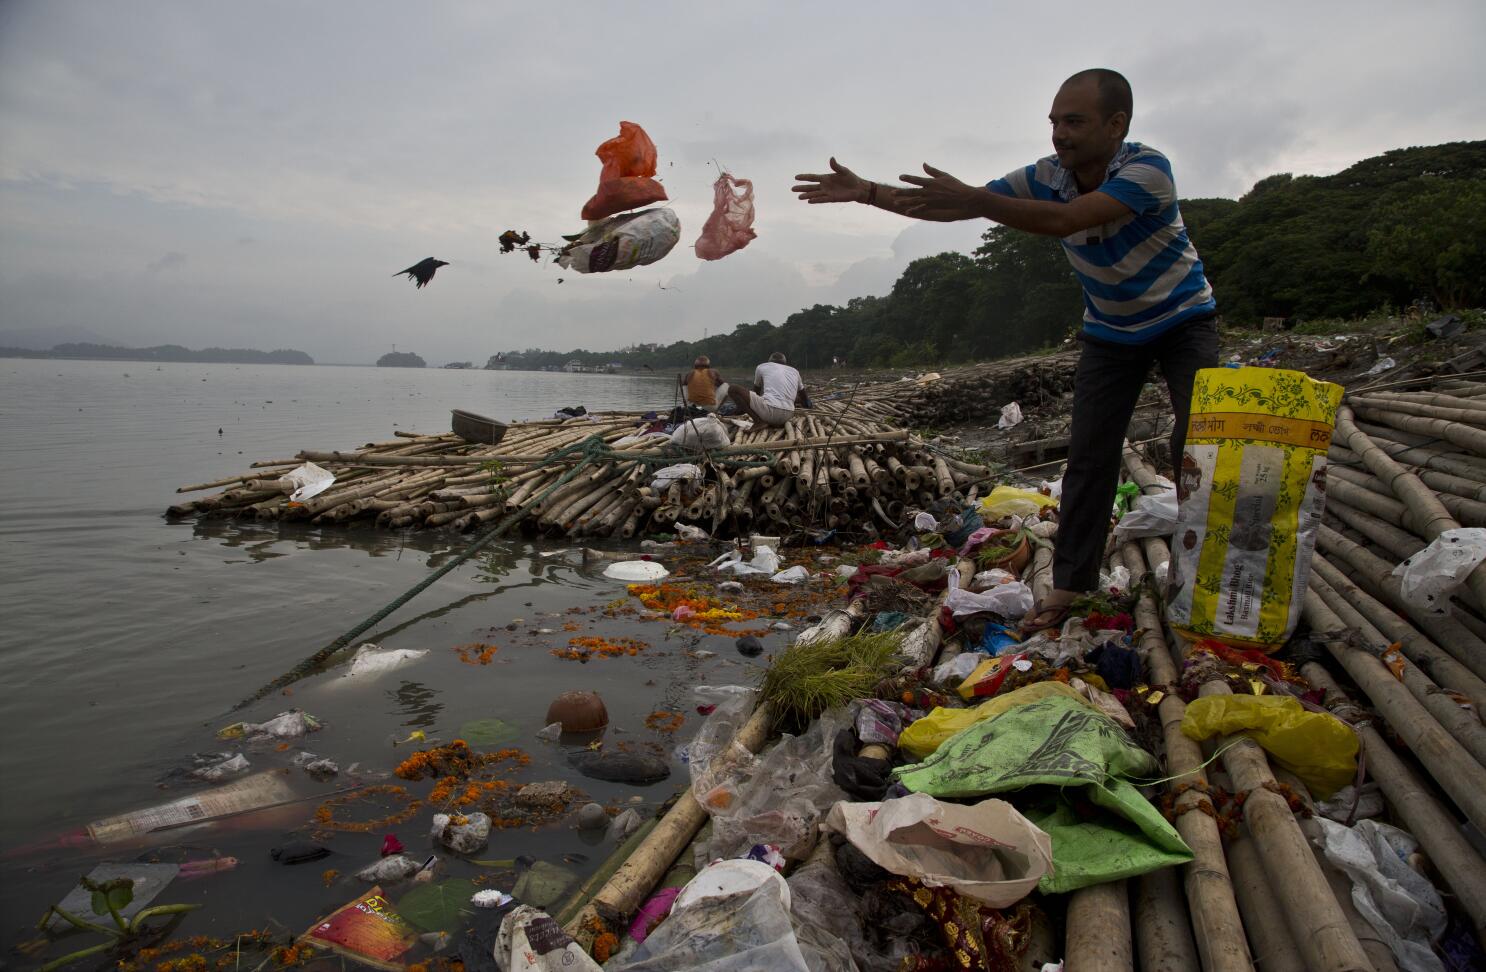 Delegates working to end global plastics pollution agree to craft a